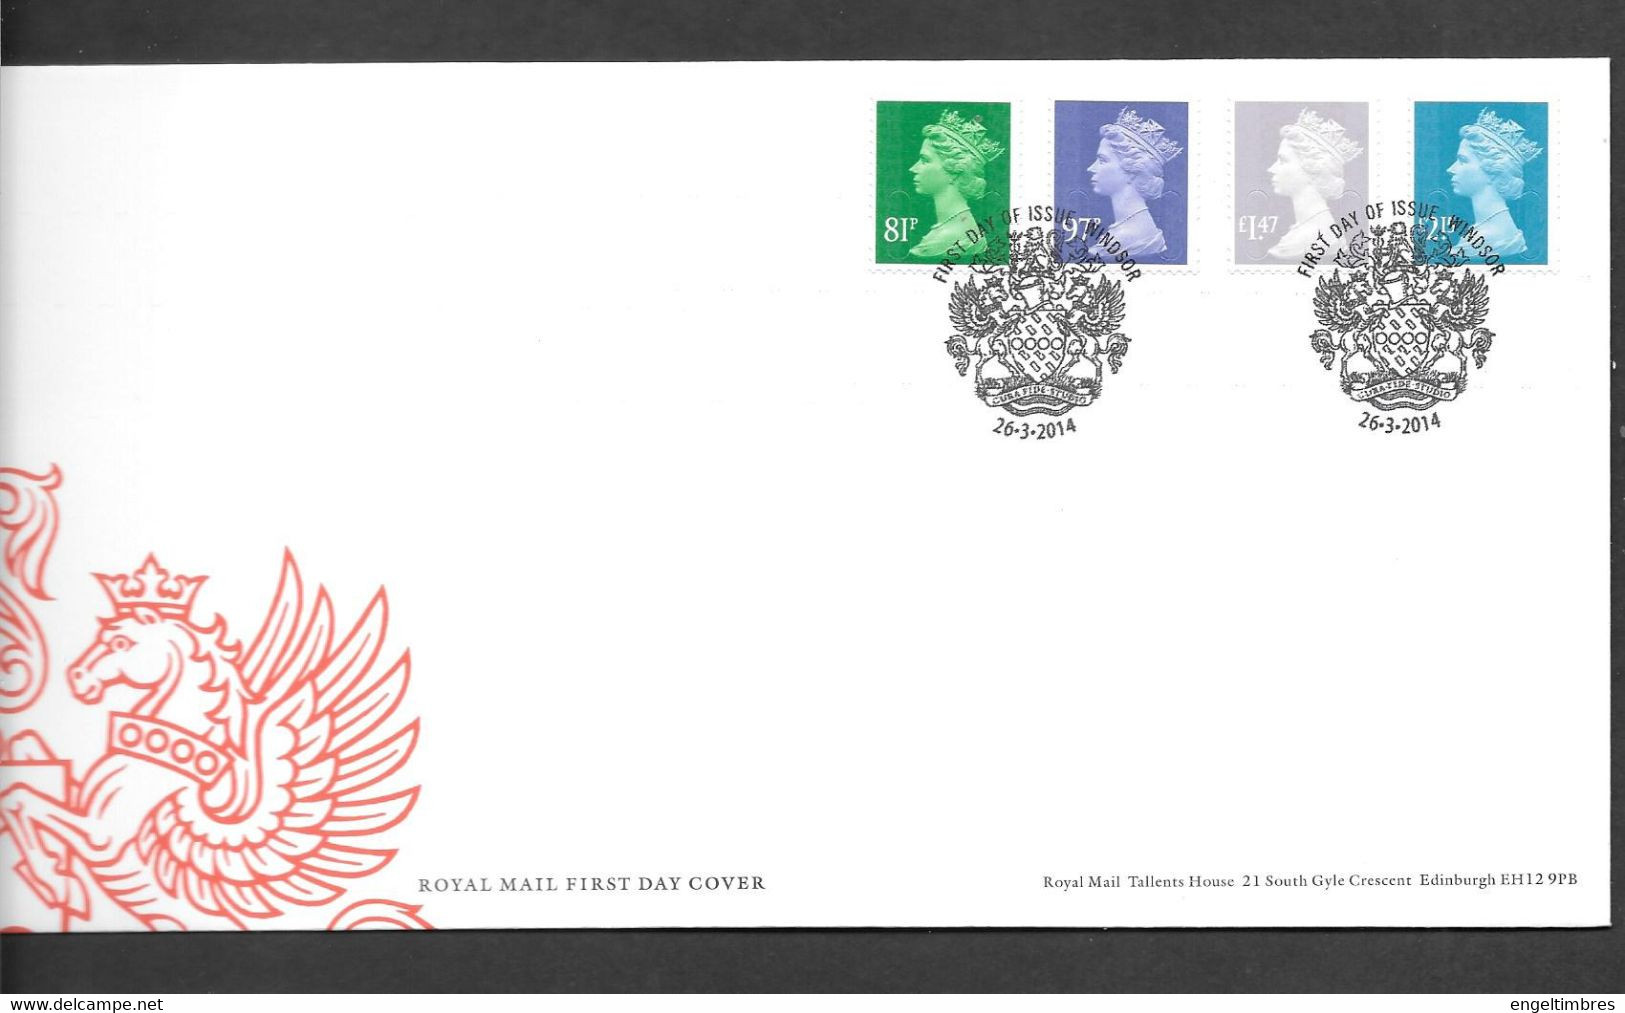 GB - 2014 New Definitive Values (4)    FDC Or  USED  "ON PIECE" - SEE NOTES  And Scans - 2011-2020 Decimal Issues